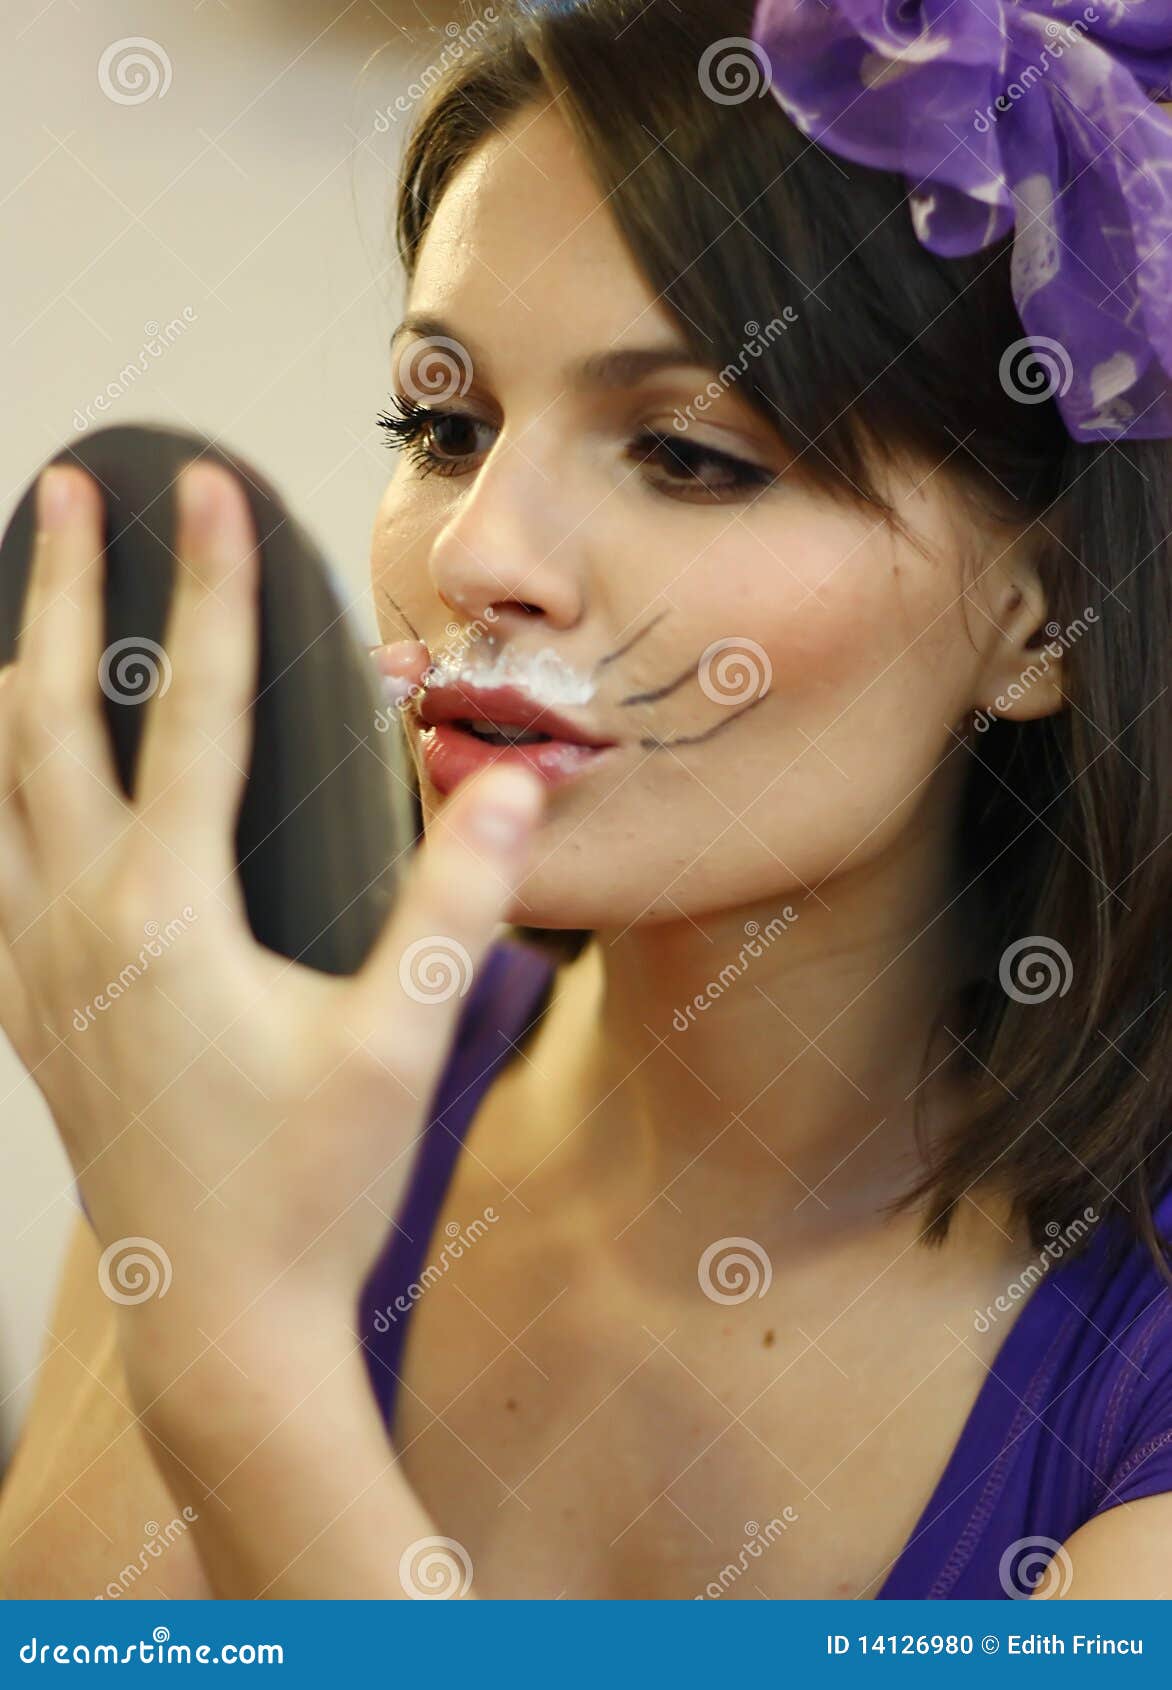 Funny Girl With Cat Whiskers  Stock Photo Image of purple 